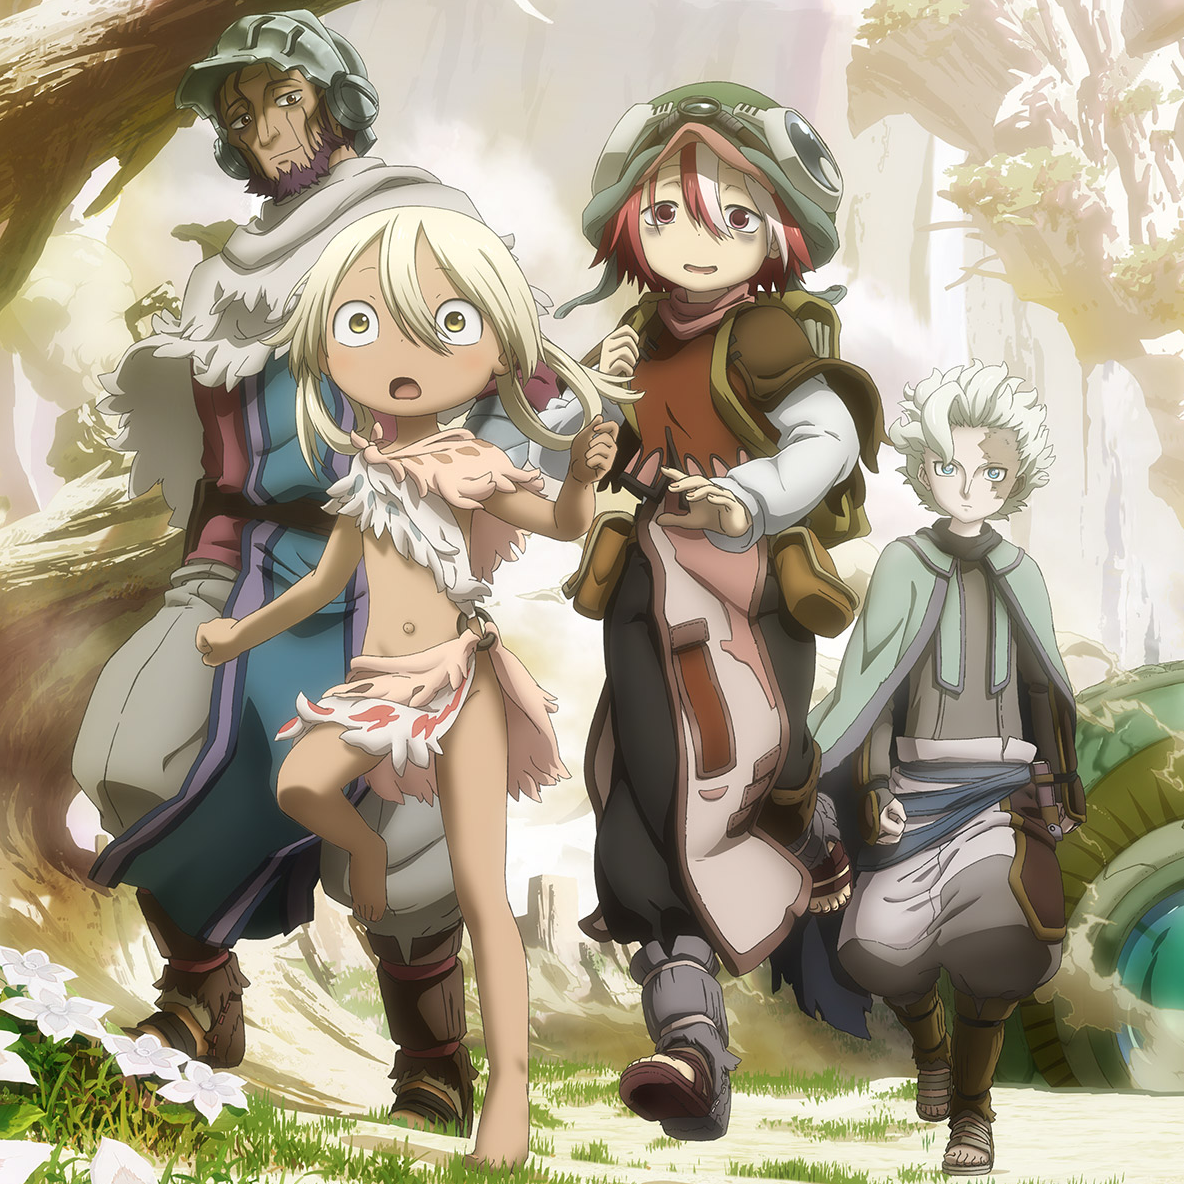 Hello Abyss, Made in Abyss Wiki